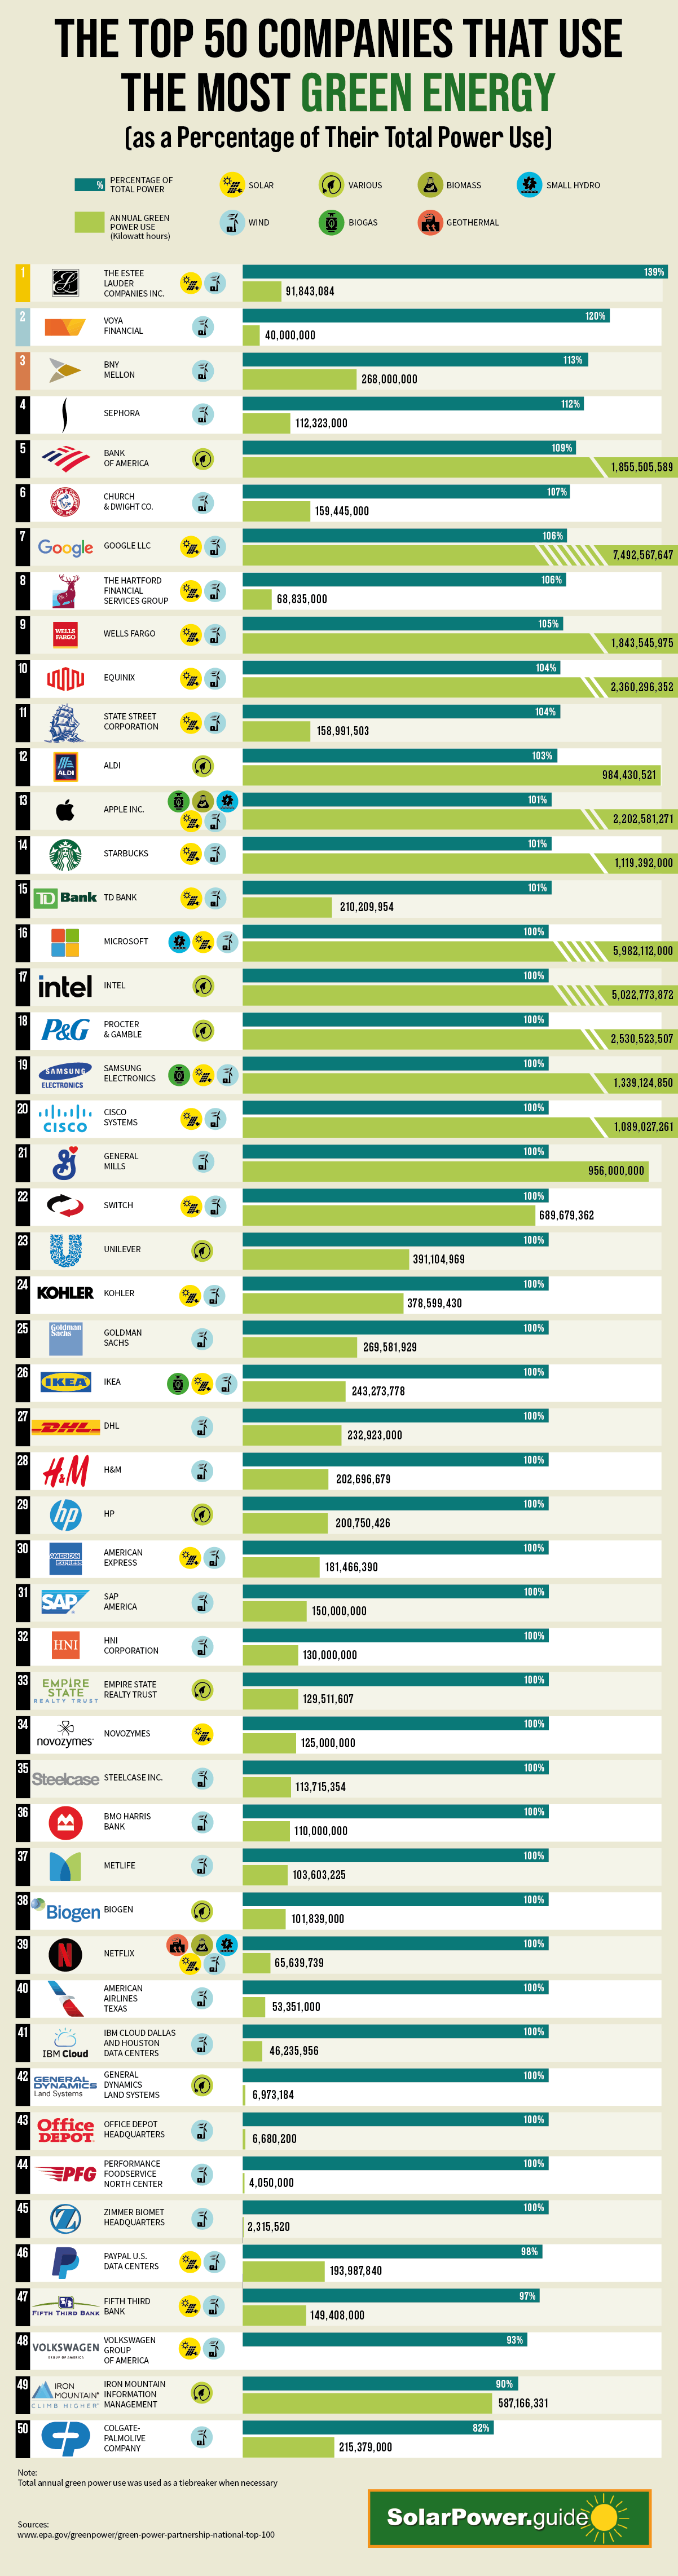 The Top 50 Companies That Use the Most Green Energy (as a Percentage of Their Total Power Use) - Solar Power Guide - Infographic